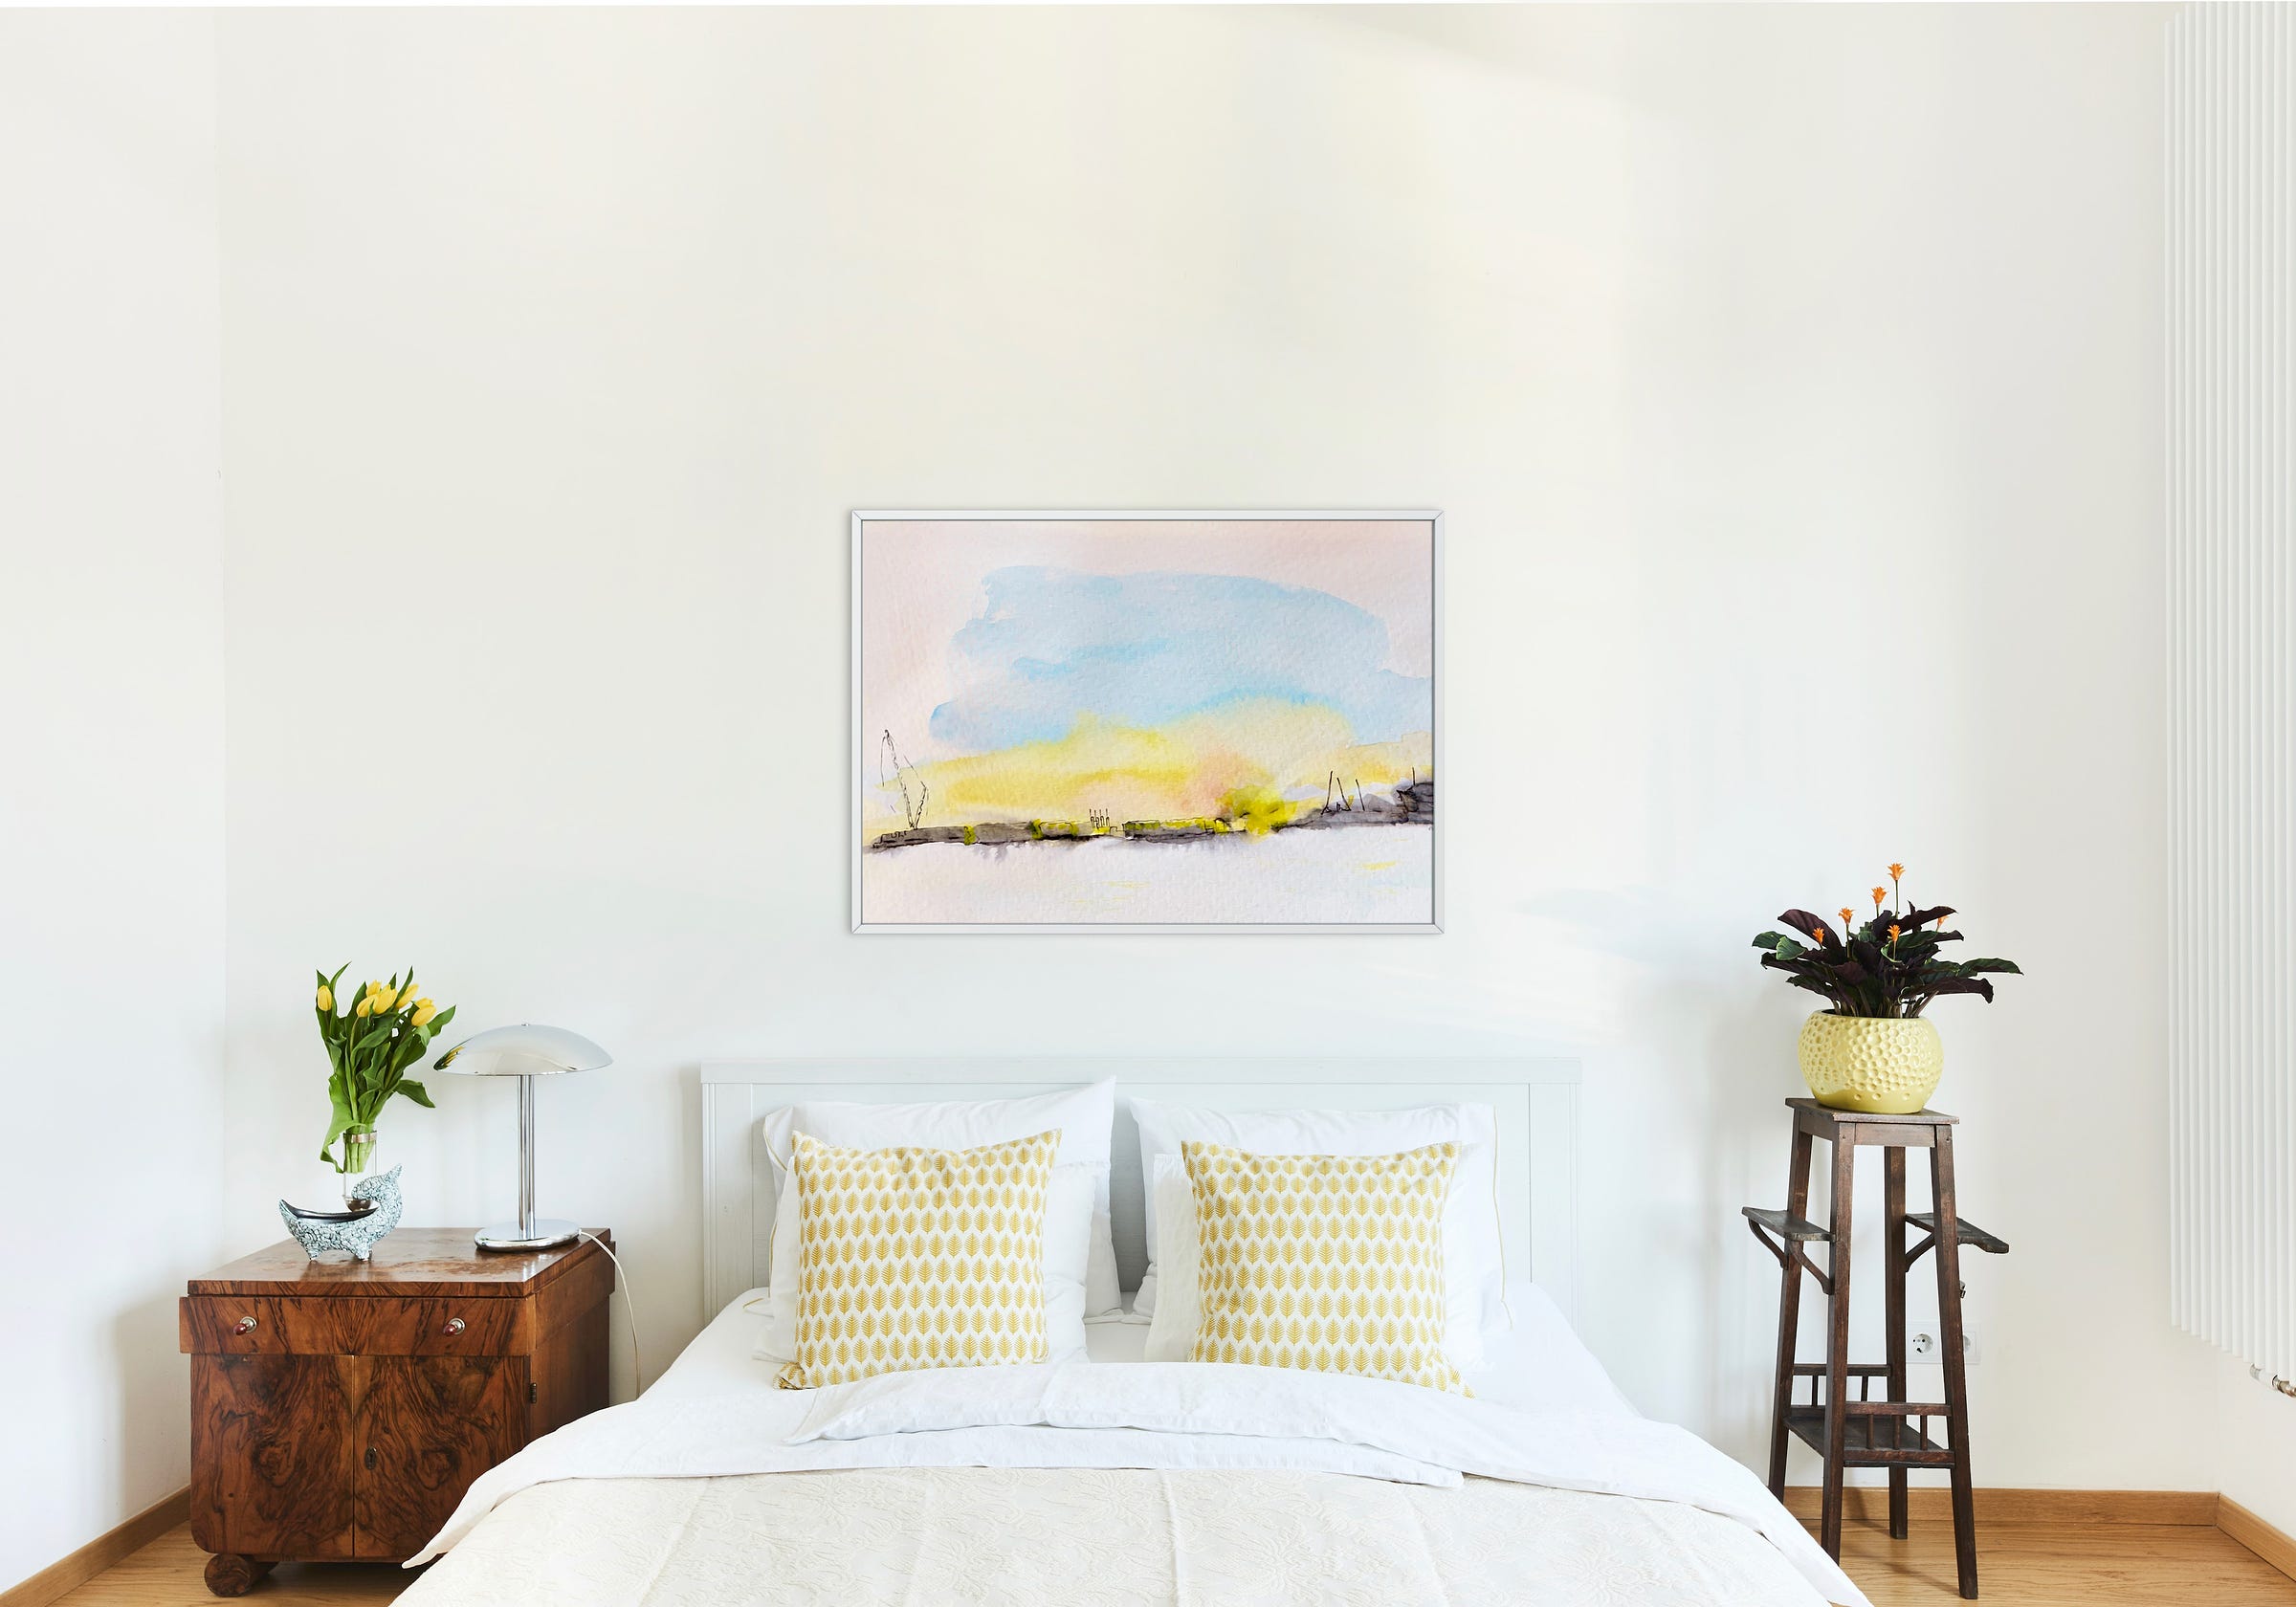 image: ink and watercolour painting of Matosinhos Beach artwork in a white frame in a bright bedroom setting